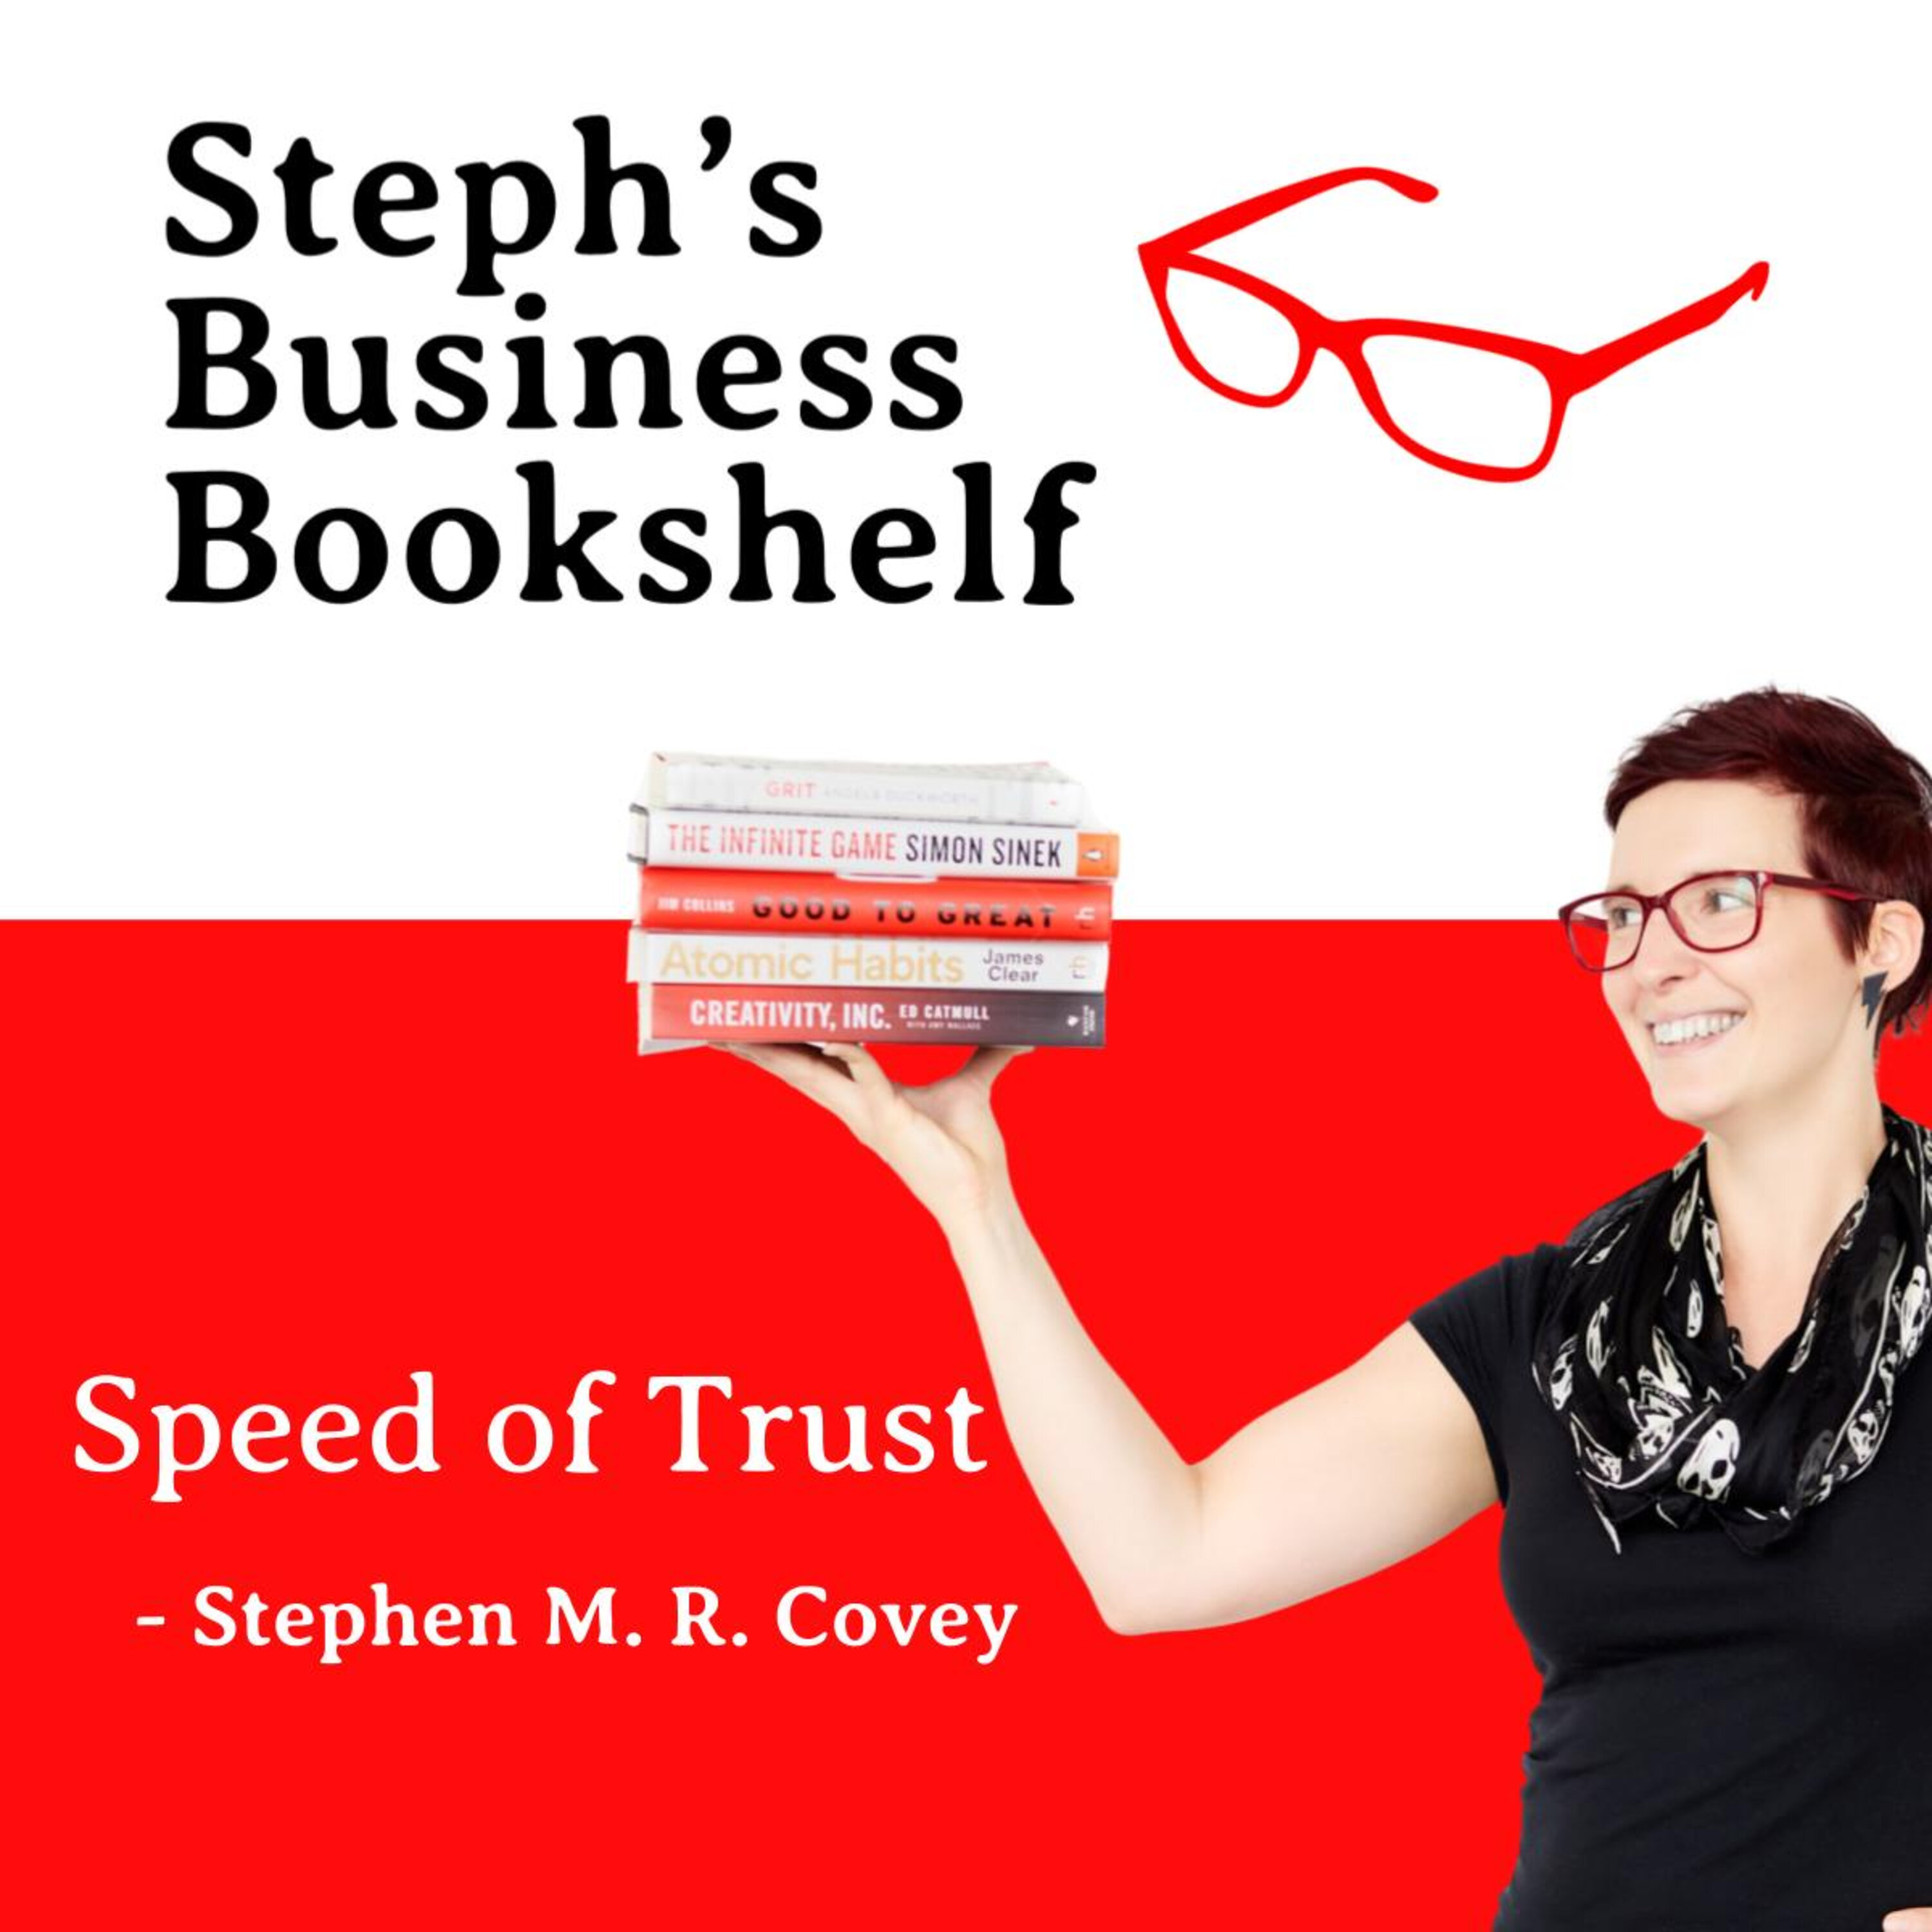 Speed of Trust by Stephen Covey: Why trust is at the heart of everything